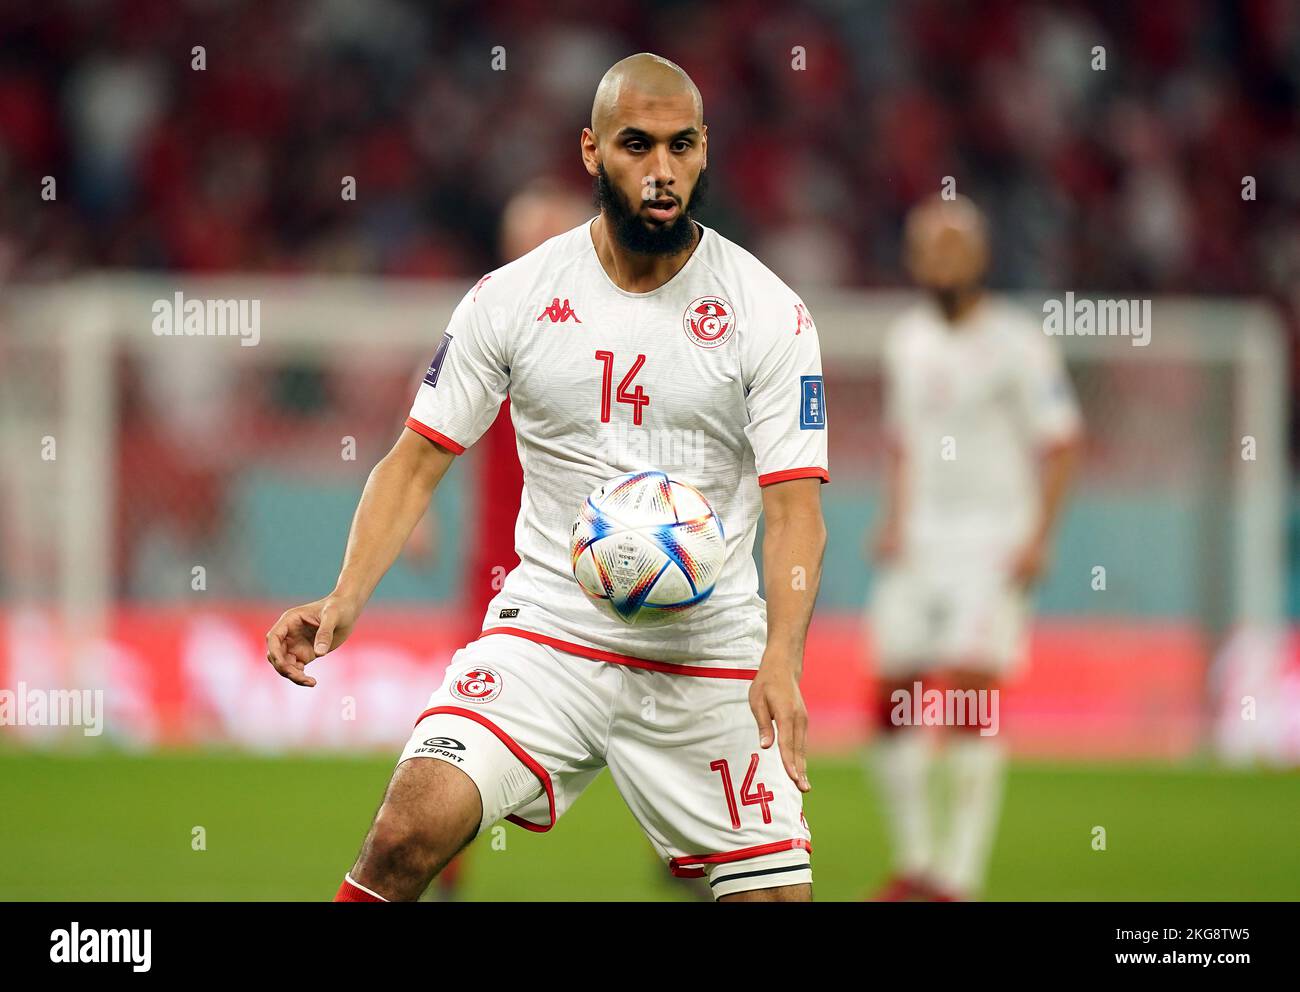 Tunisia’s Aissa Laidouni during the FIFA World Cup Group D match at Education City Stadium, Al Rayyan, Qatar. Picture date: Tuesday November 22, 2022. Stock Photo